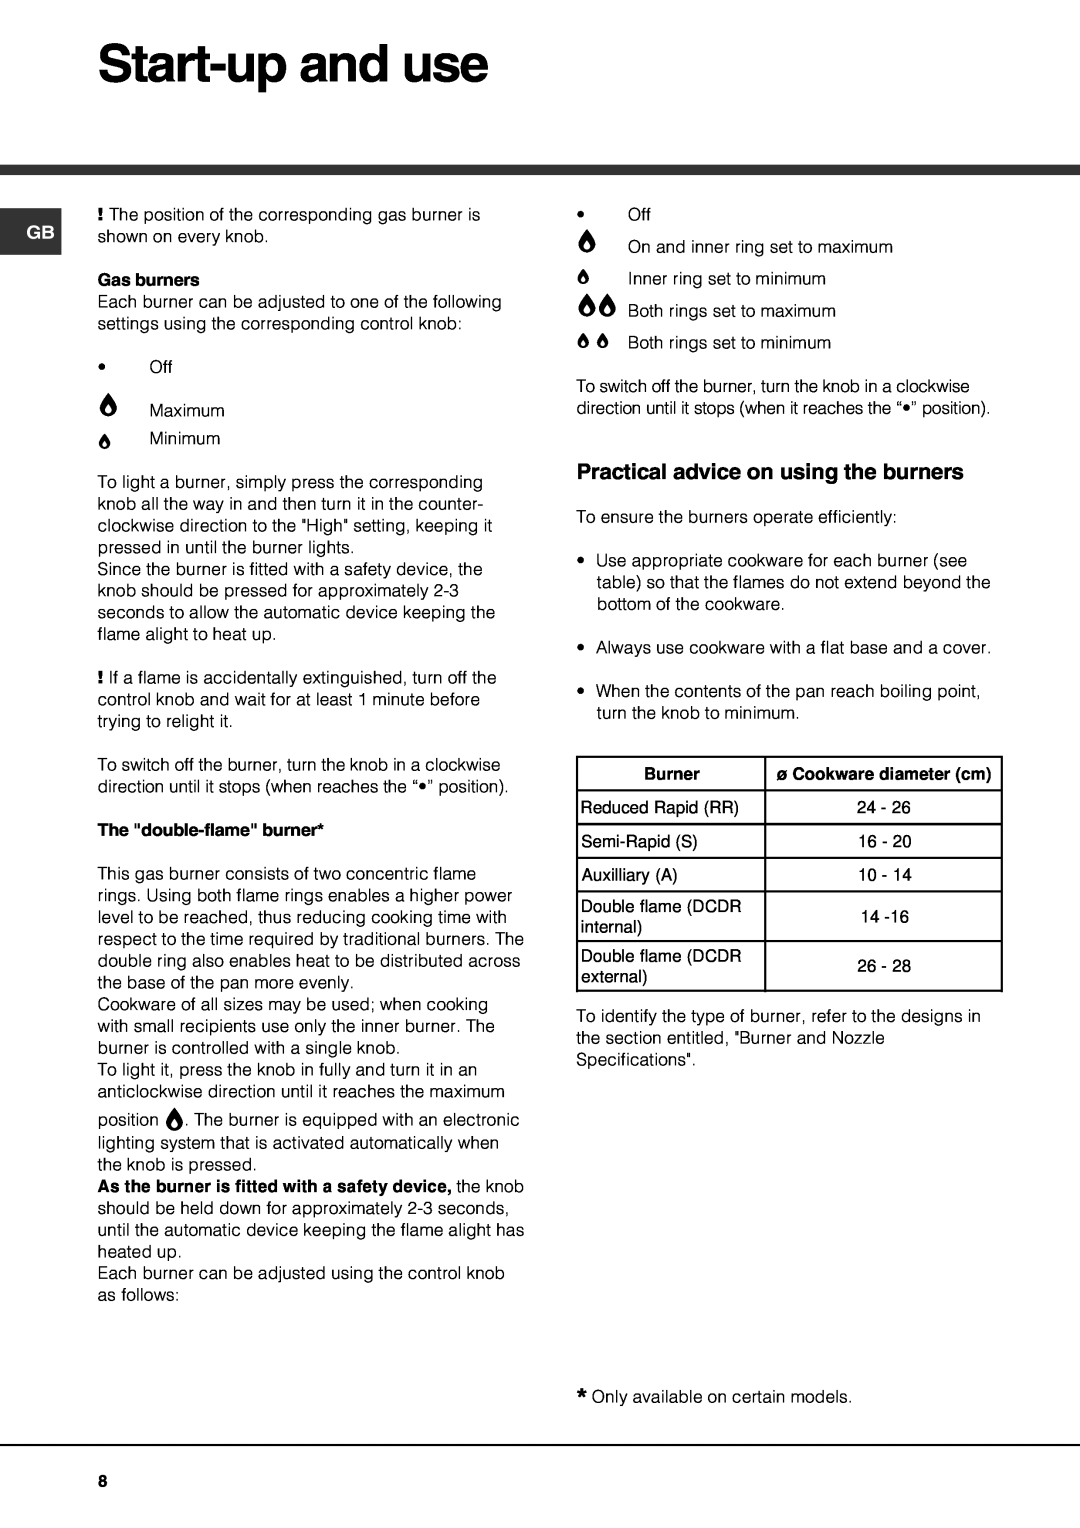 Hotpoint GE750DX operating instructions Start-upand use, Practical advice on using the burners 